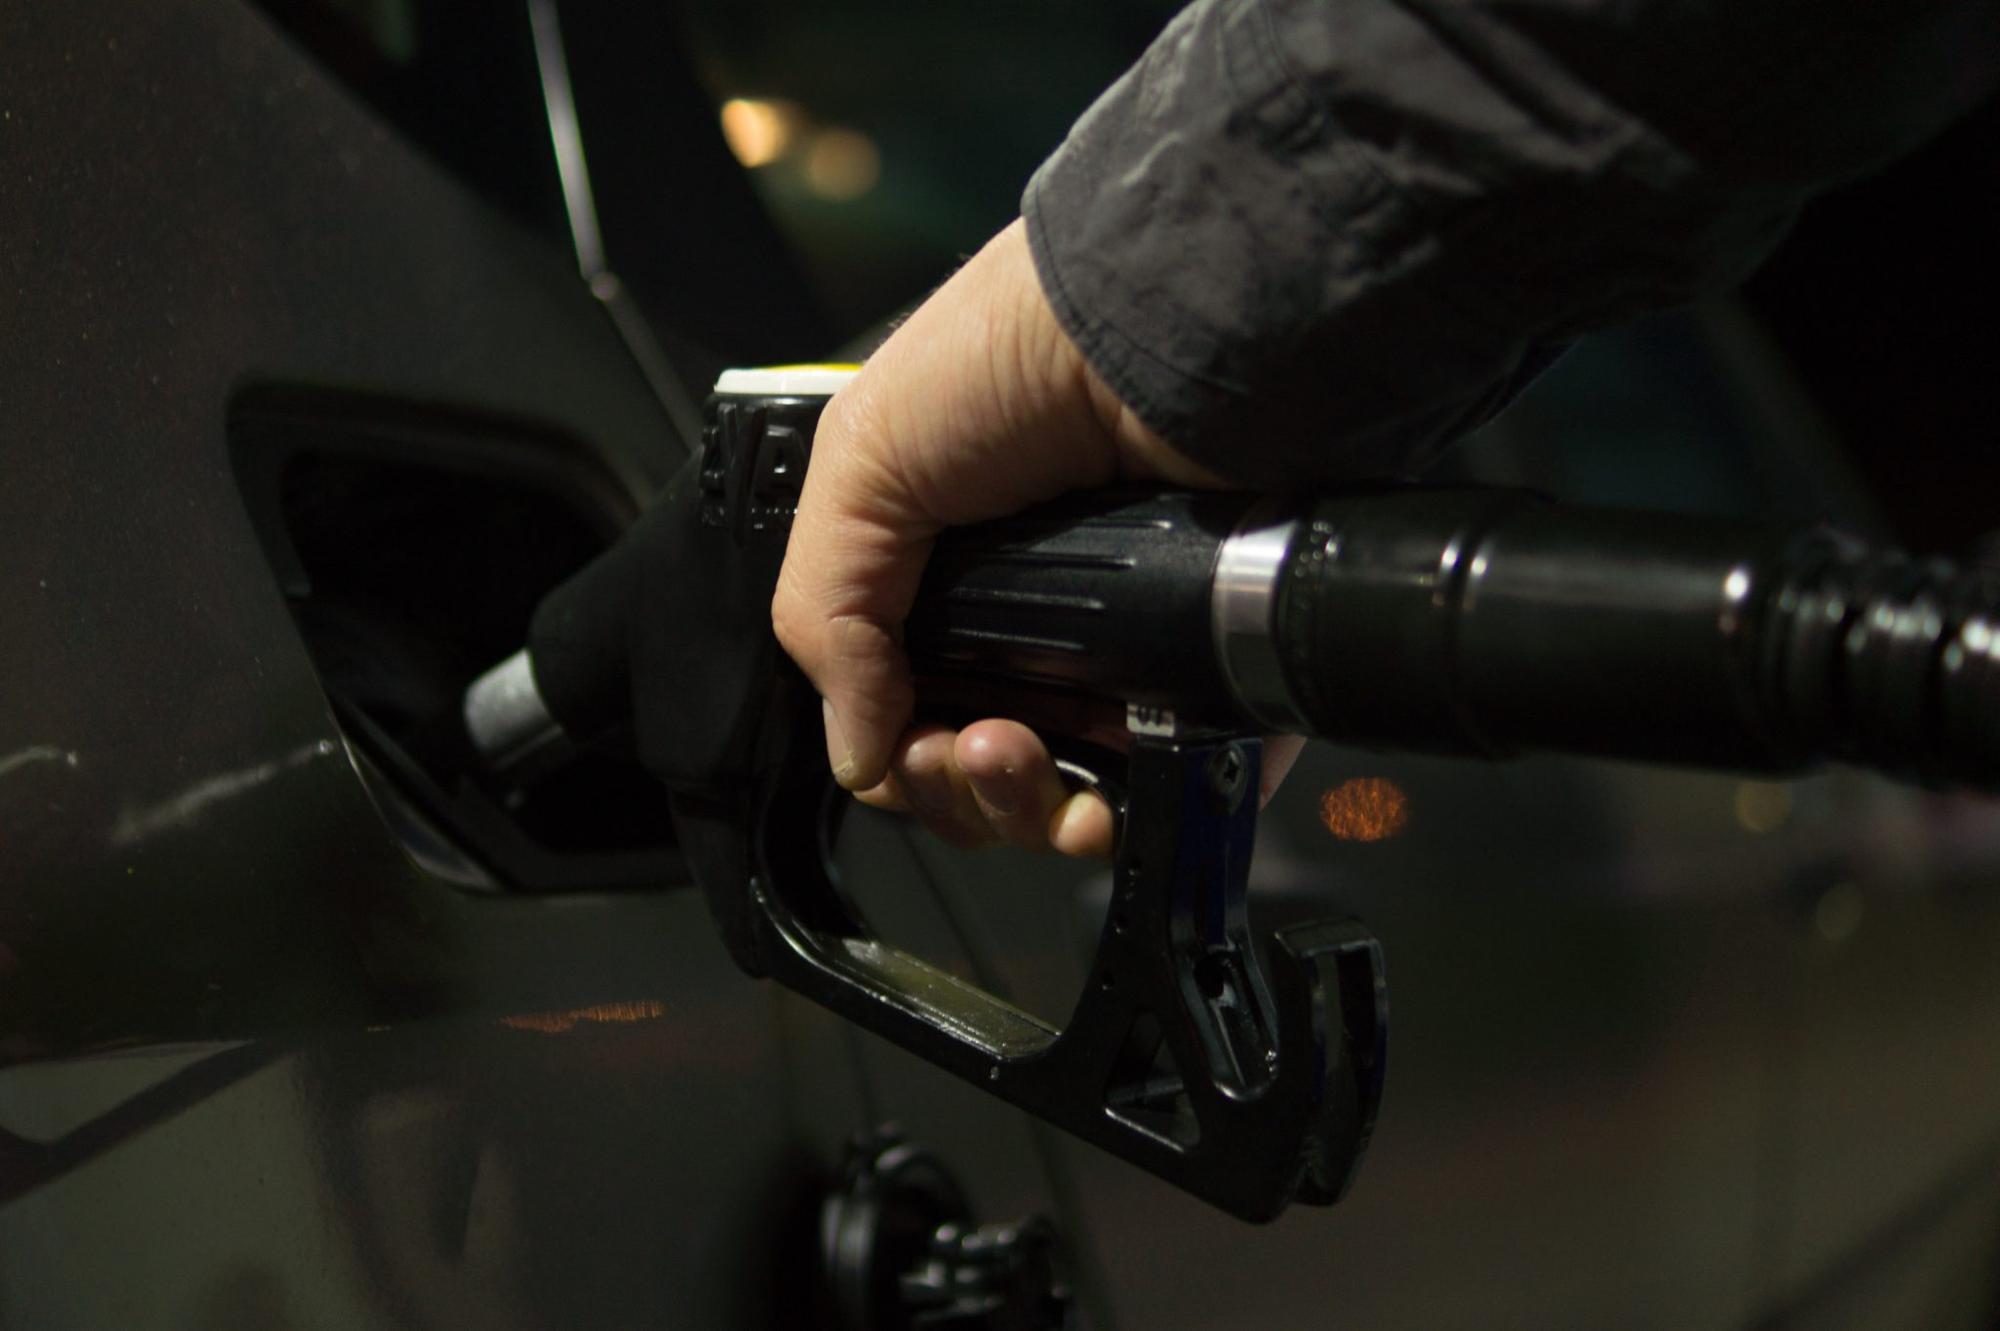 Gas stations see decline in business due to fewer road trips